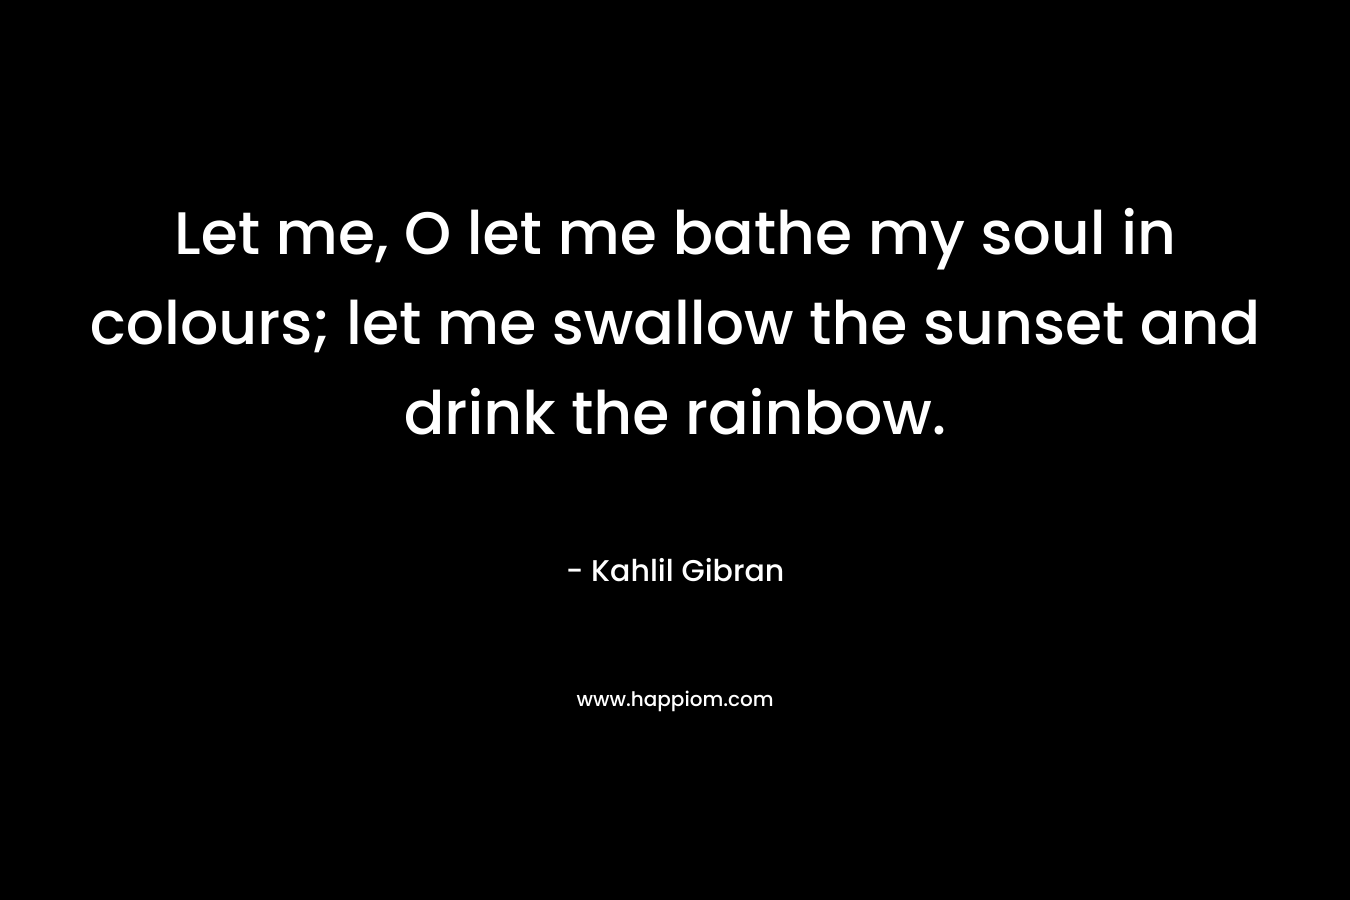 Let me, O let me bathe my soul in colours; let me swallow the sunset and drink the rainbow.